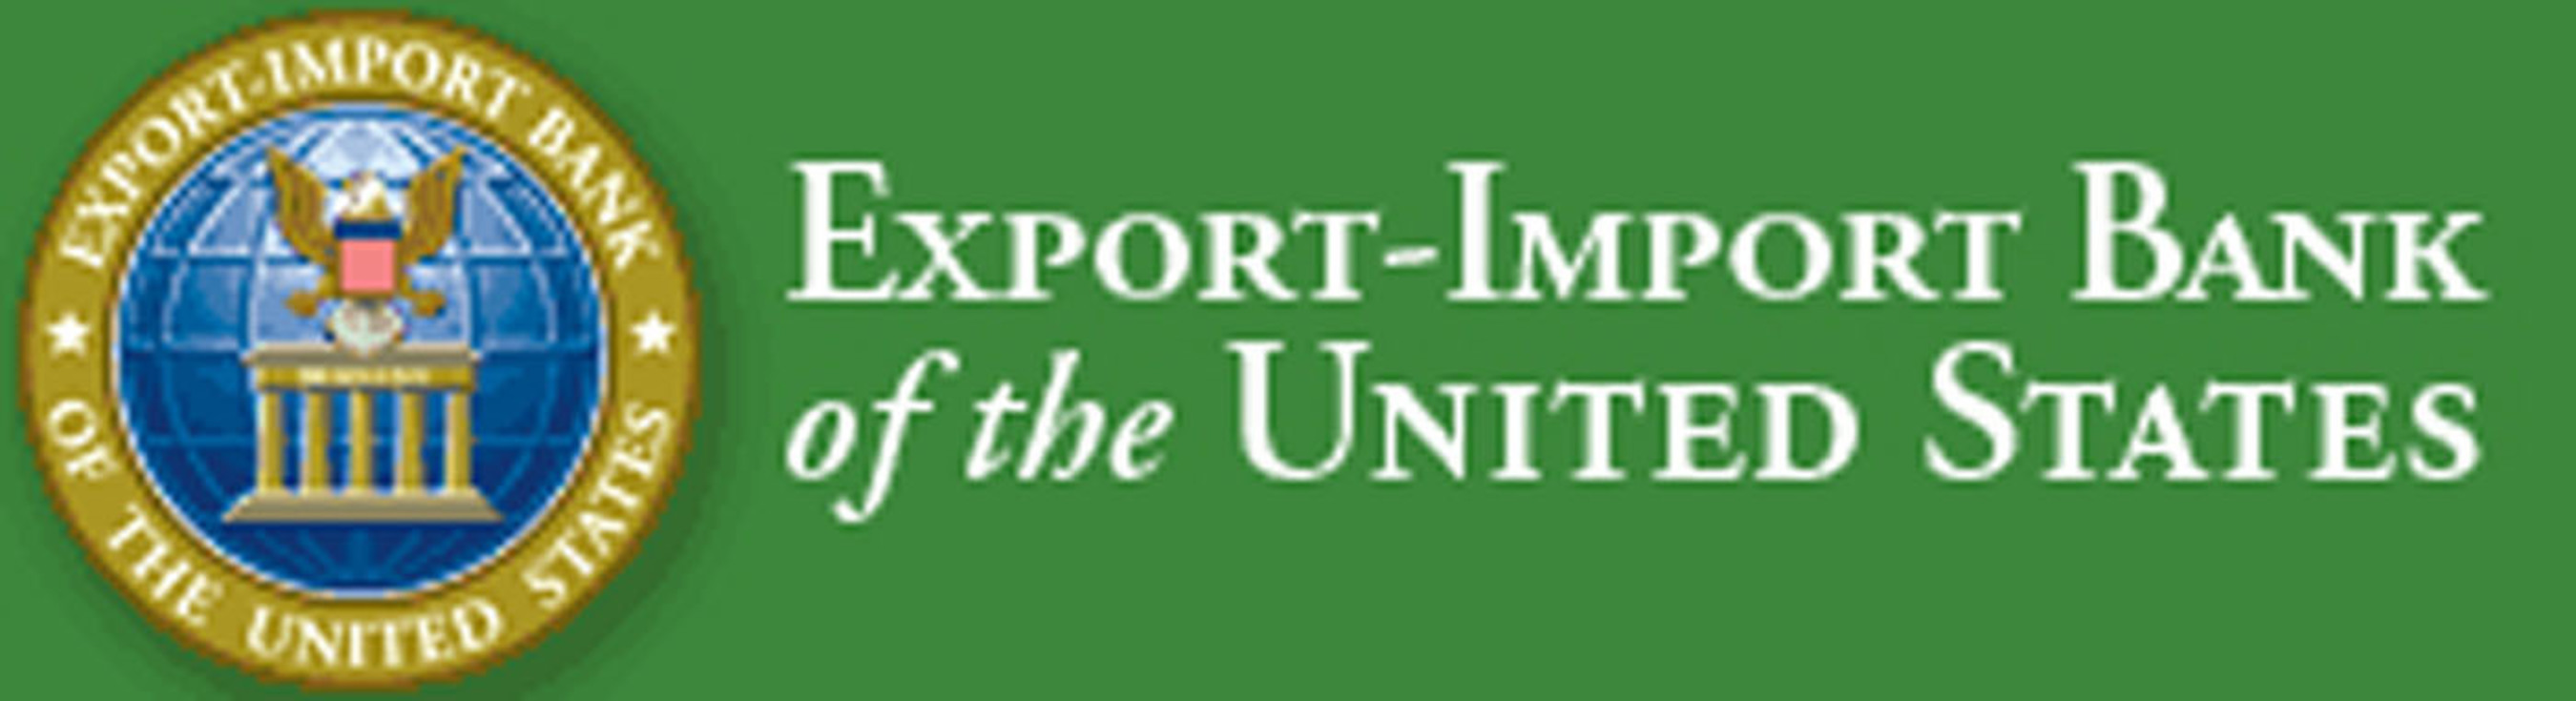 Export-Import Bank of the United States (PRNewsFoto/)